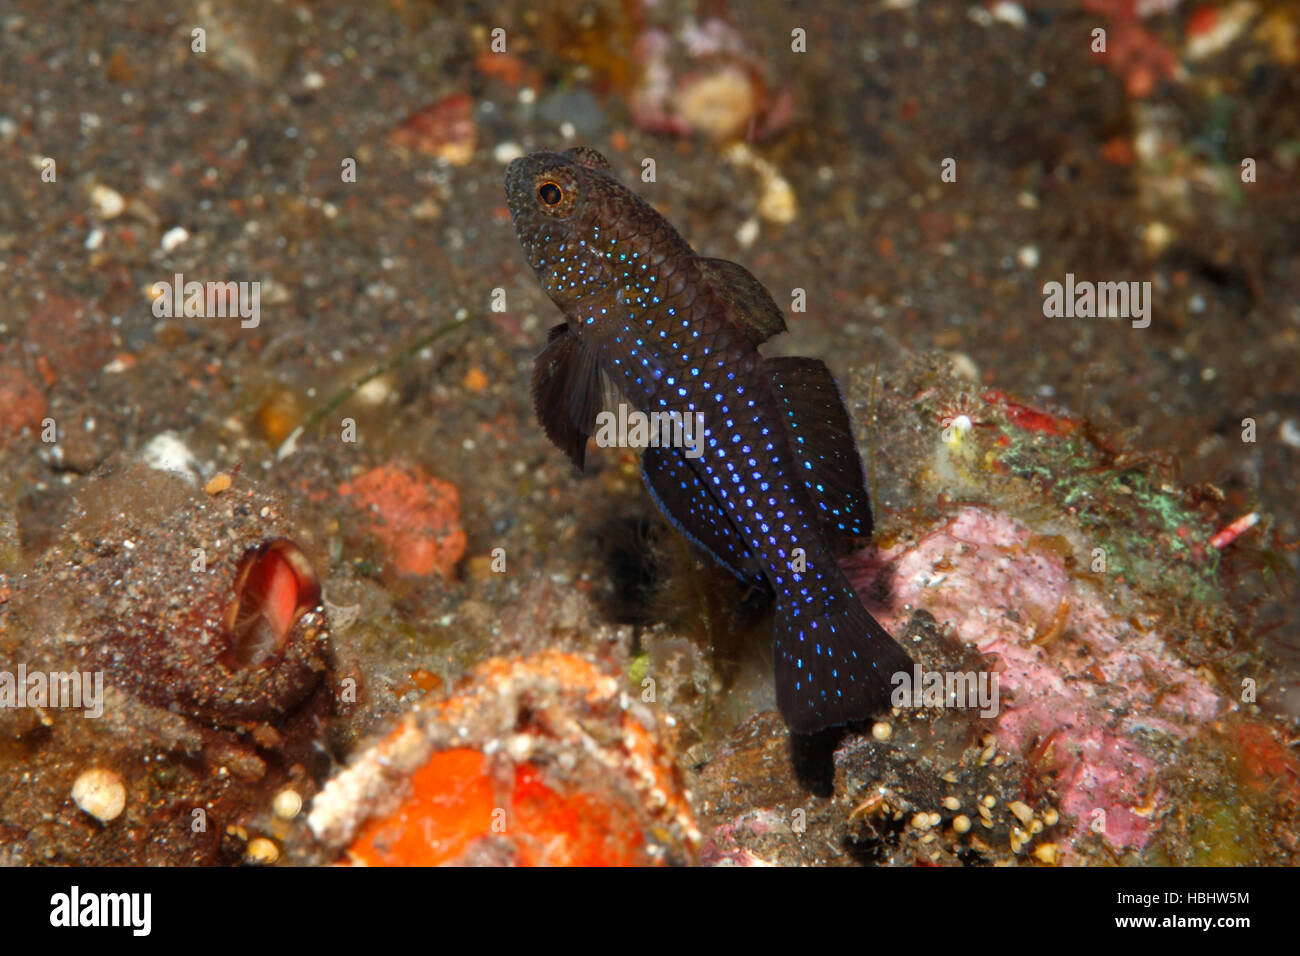 Cheekspine Goby, also known as Bluedot Goby and Miller's damsel, Asterropteryx ensifera. Tulamben, Bali, Indonesia. Bali Sea, Indian Ocean Stock Photo